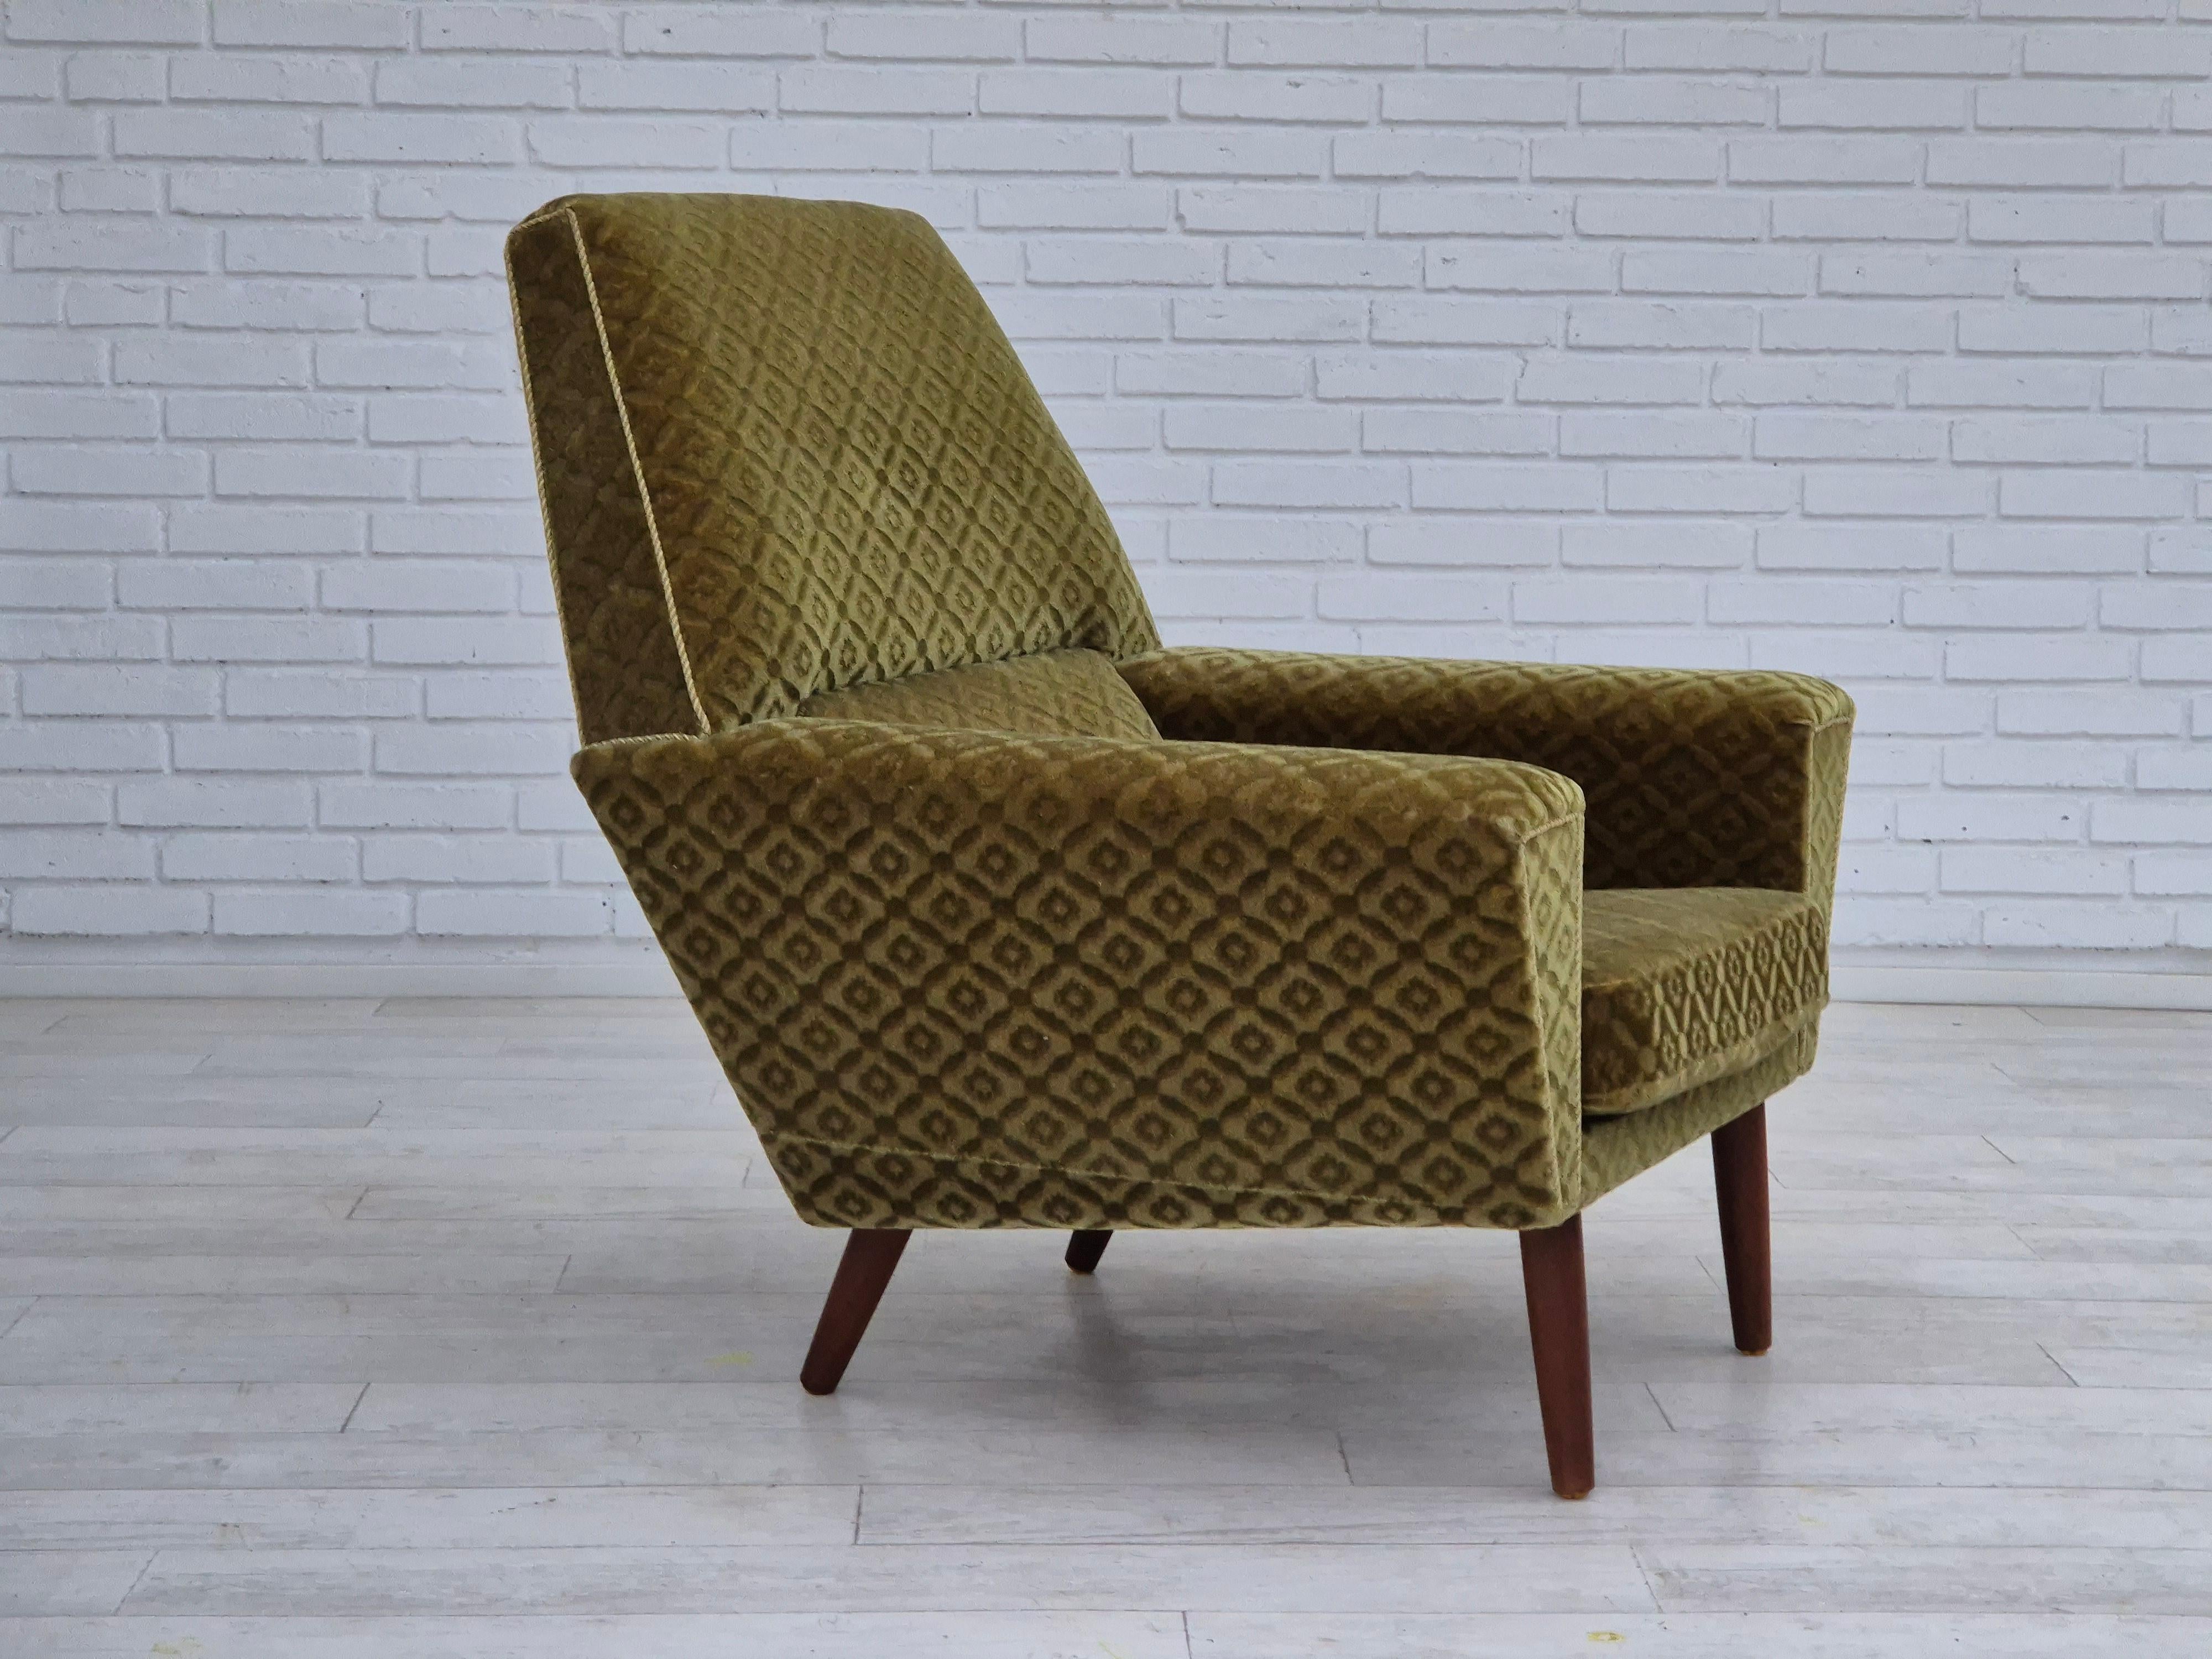 1970s, Danish highback armchair in original very good condition: no smells and no stains. Green furniture velour, teak wood legs. Springs in the seat cushion. Manufactured by Danish furniture manufacturer in about 1970s. Designed by Georg Thams for